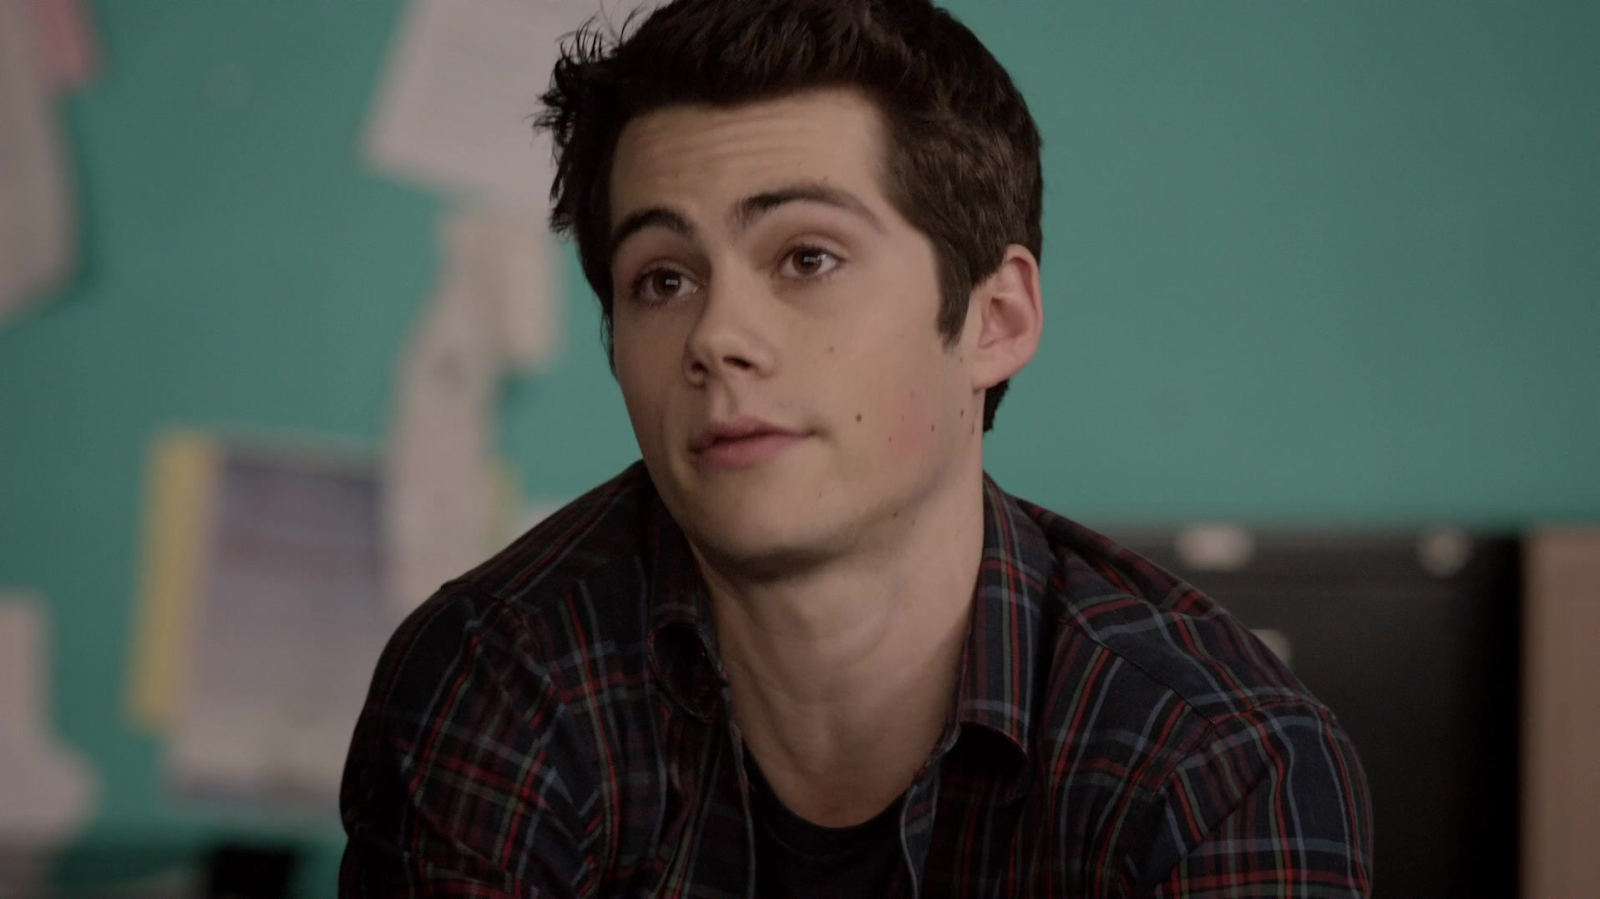 Fourth we have Stiles Stilinski from Teen Wolf, aka my favorite show of all...